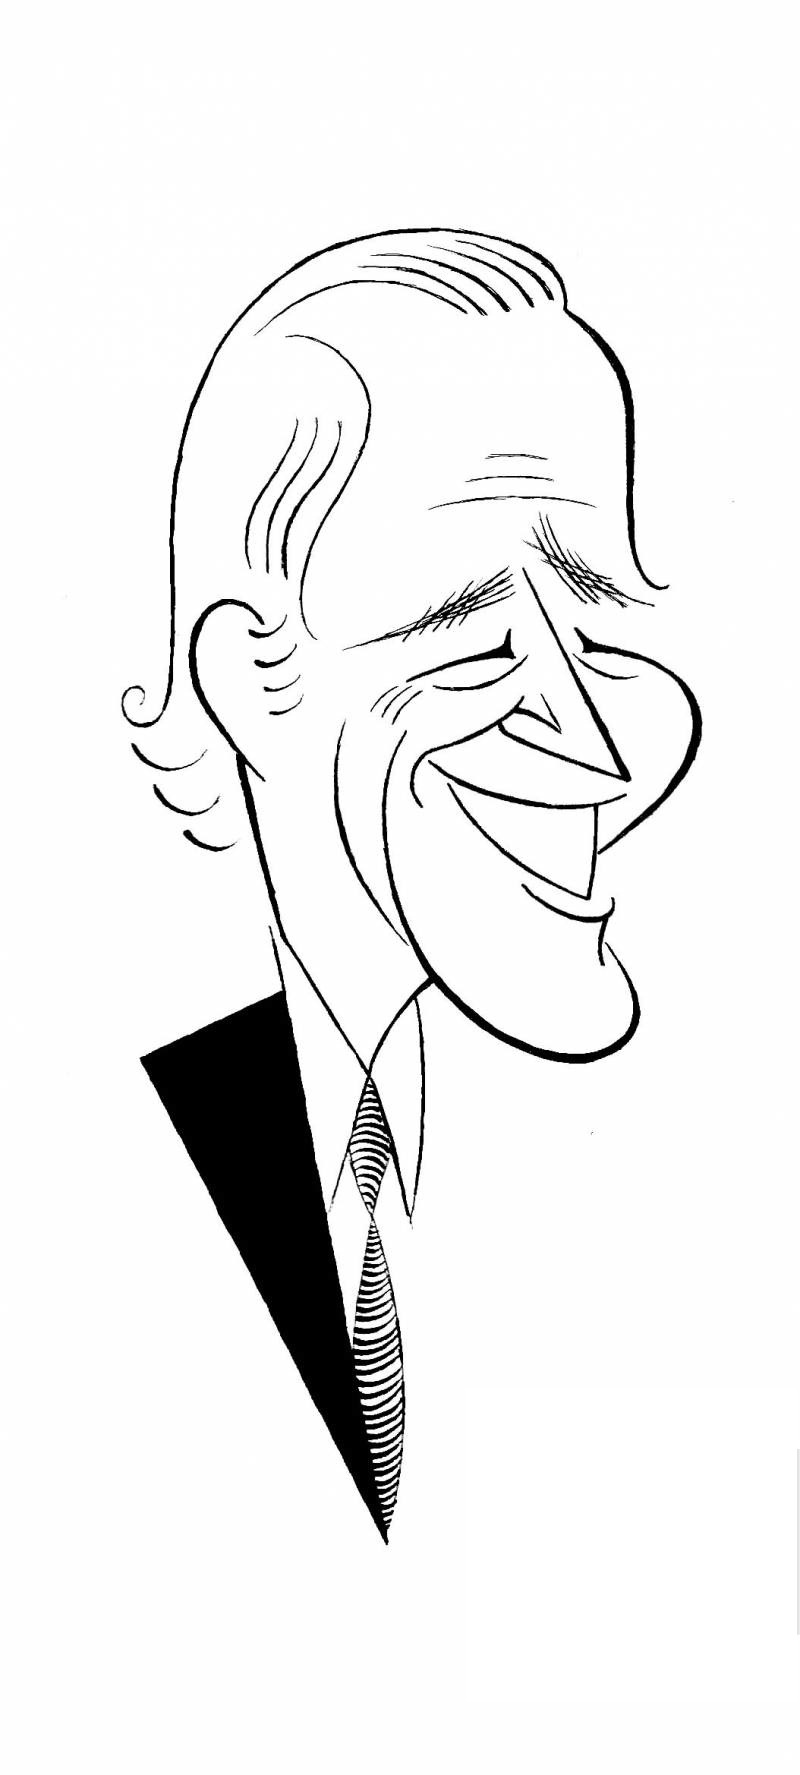 Meet Joe Biden Coloring Page - Free Coloring Pages Online